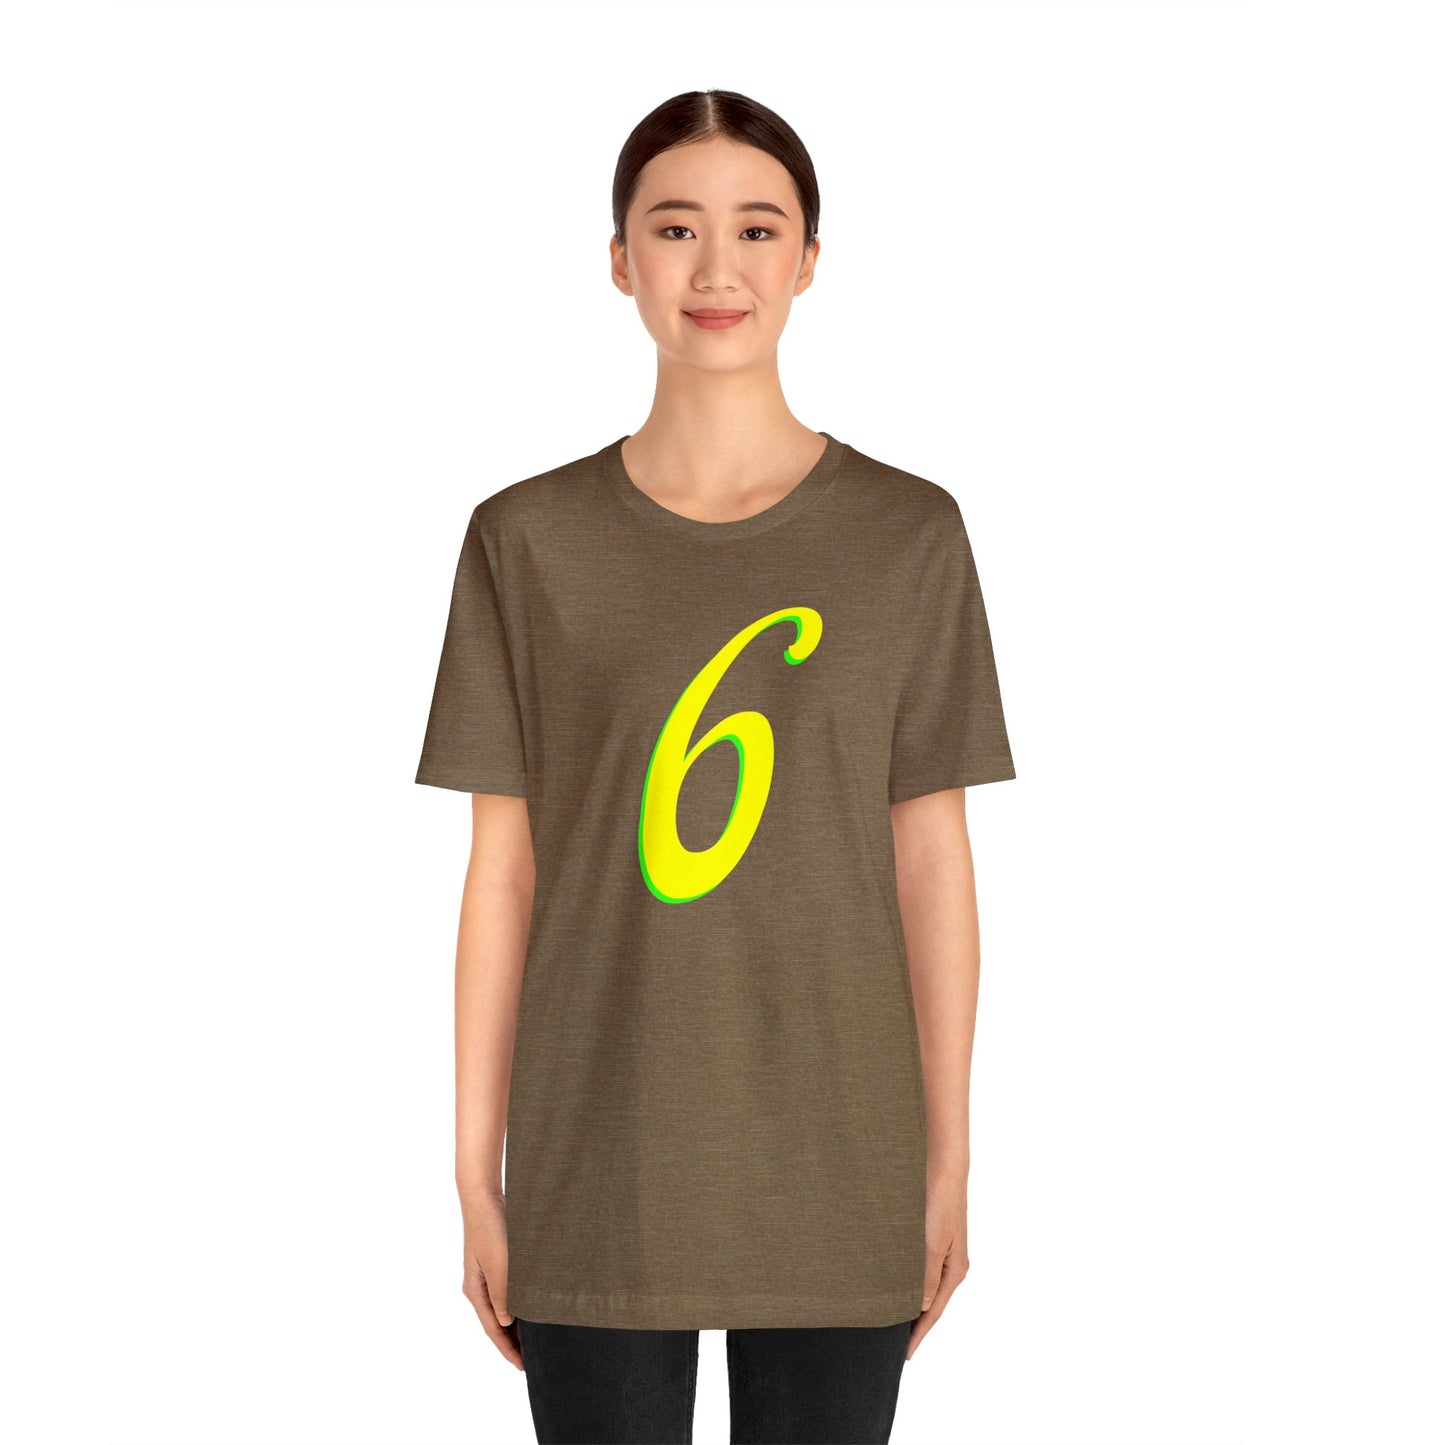 Number 6 Design - Soft Cotton Tee for birthdays and celebrations, Gift for friends and family, Multiple Options by clothezy.com in Asphalt Size Medium - Buy Now